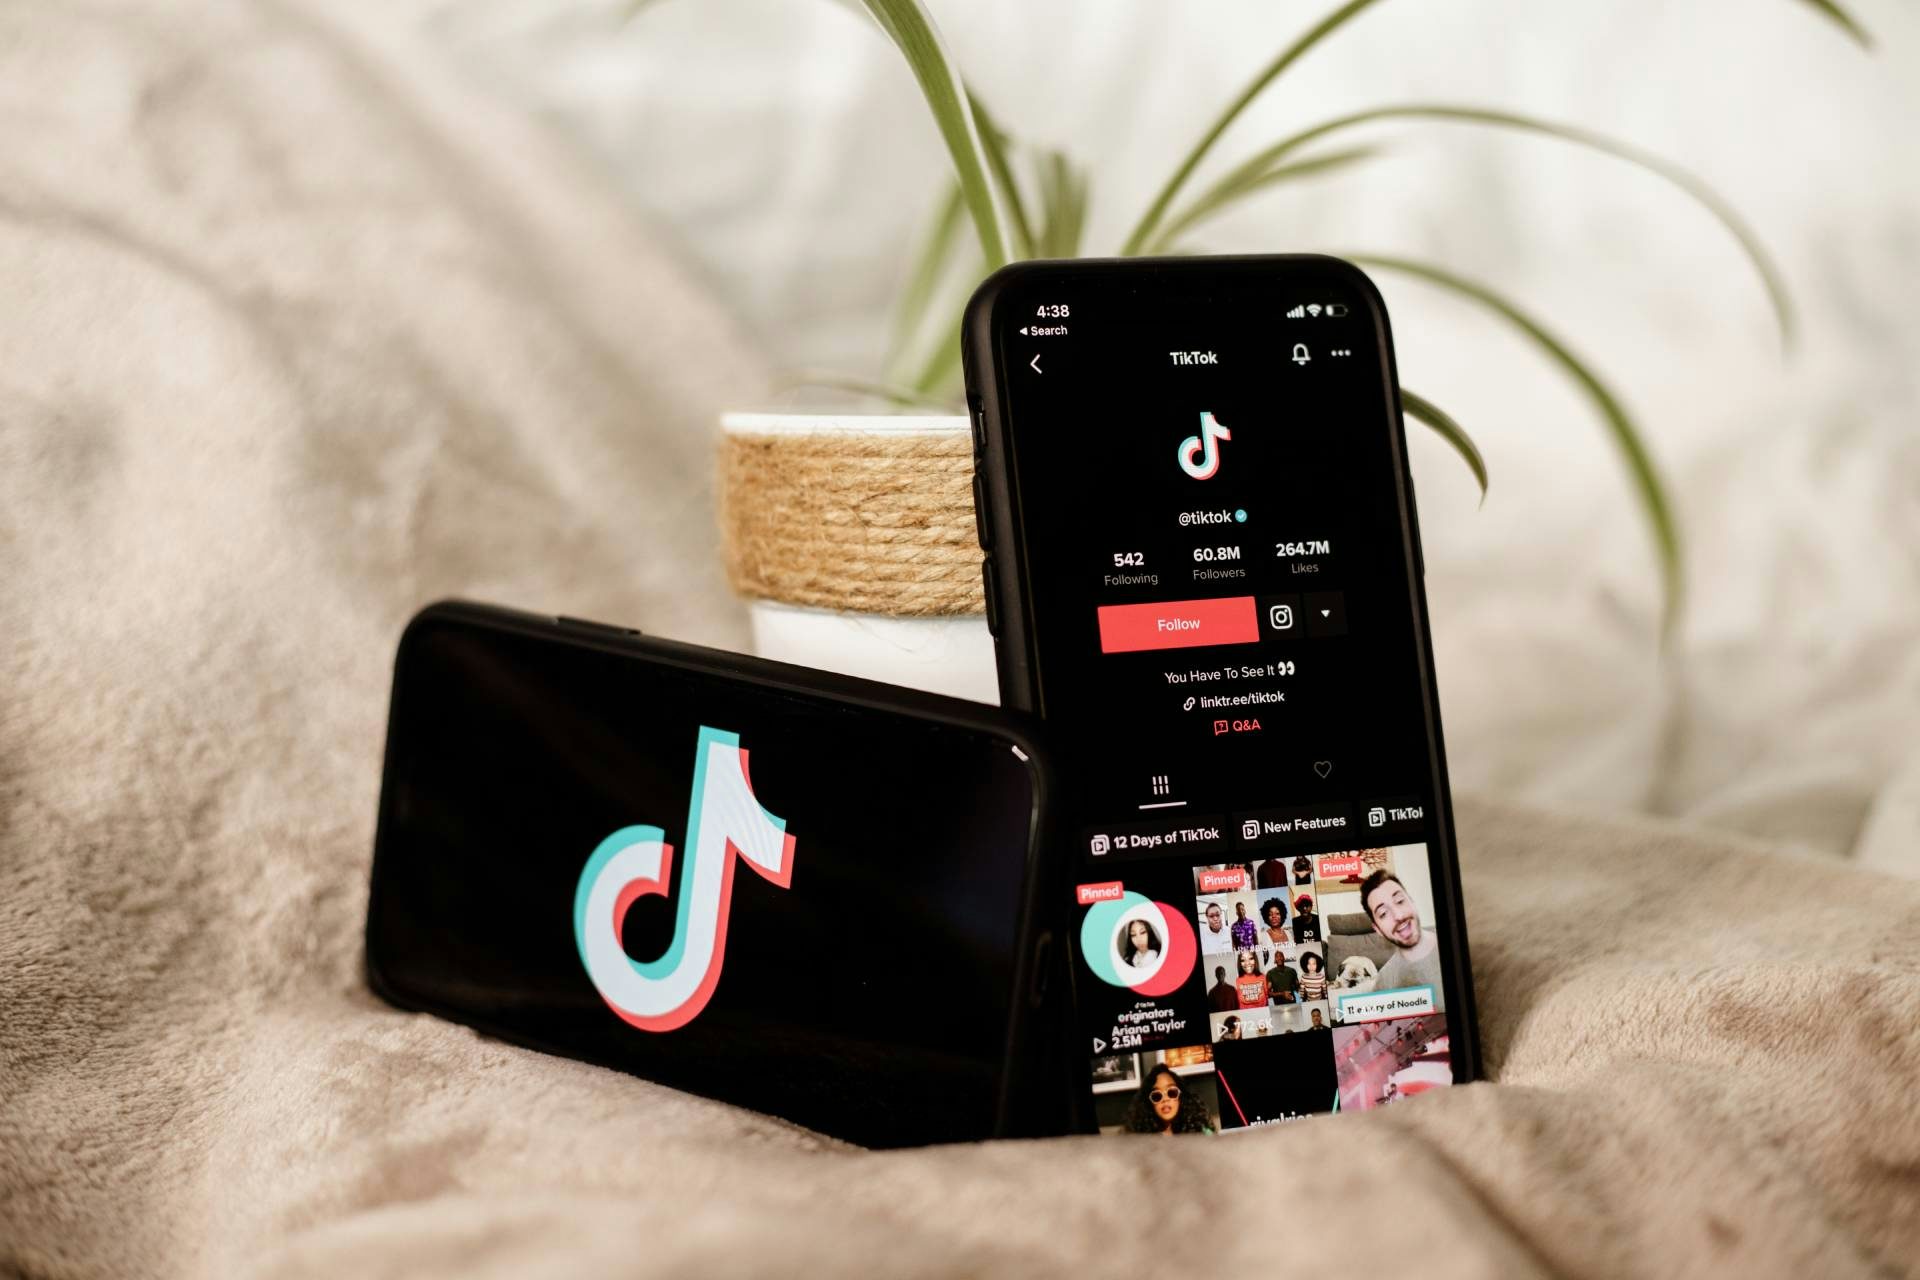 What is TikTok? Break down how the platform works and share your TikTok tips for $8!